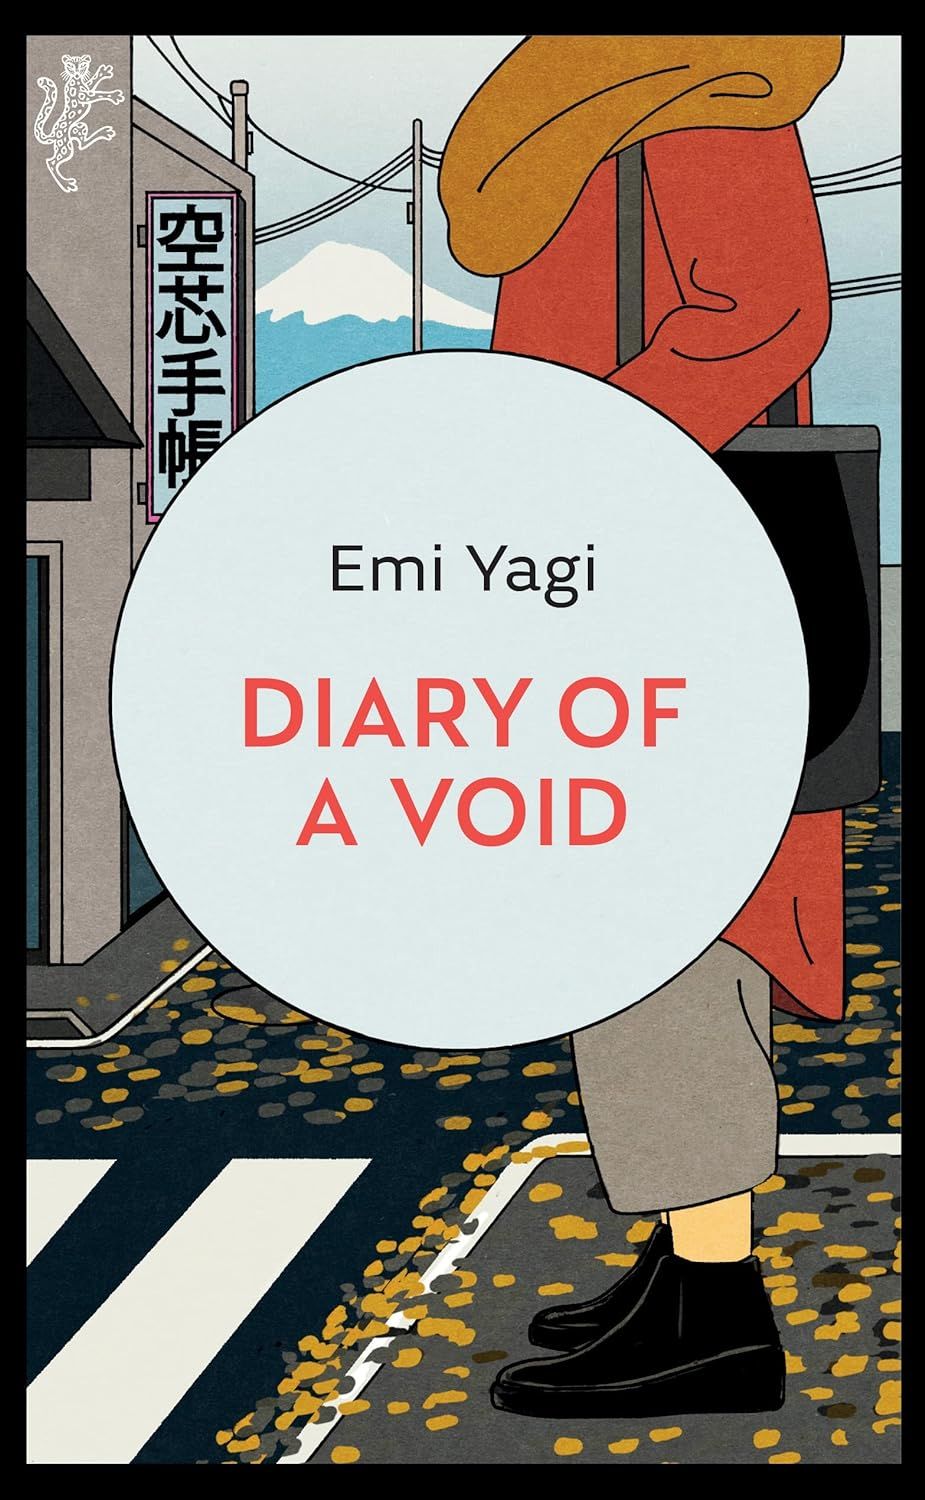 Diary of a void by Emi Yagi book cover